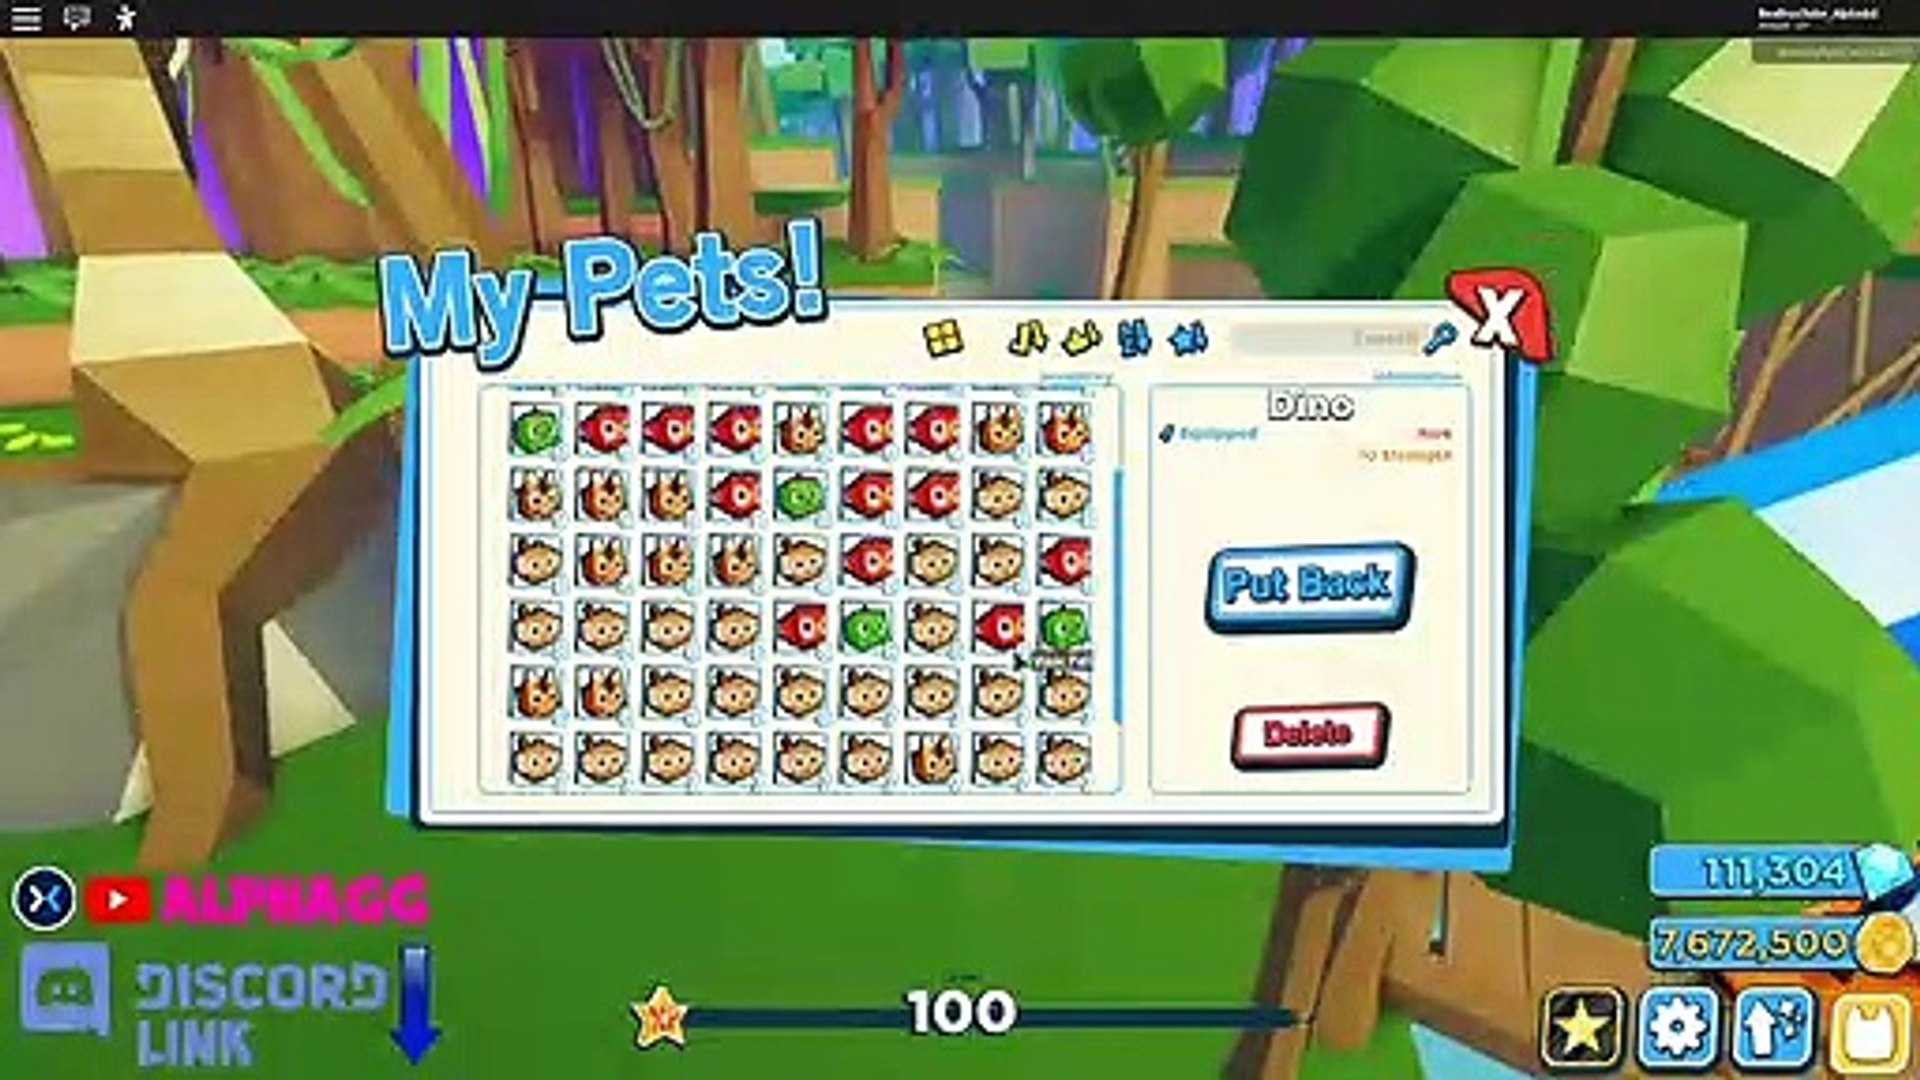 Spending 10 000 000 Coins To Get The Legendary Secret Pet In Pet Simulator 2 Roblox Video Dailymotion - codes for roblox dino pet simulator